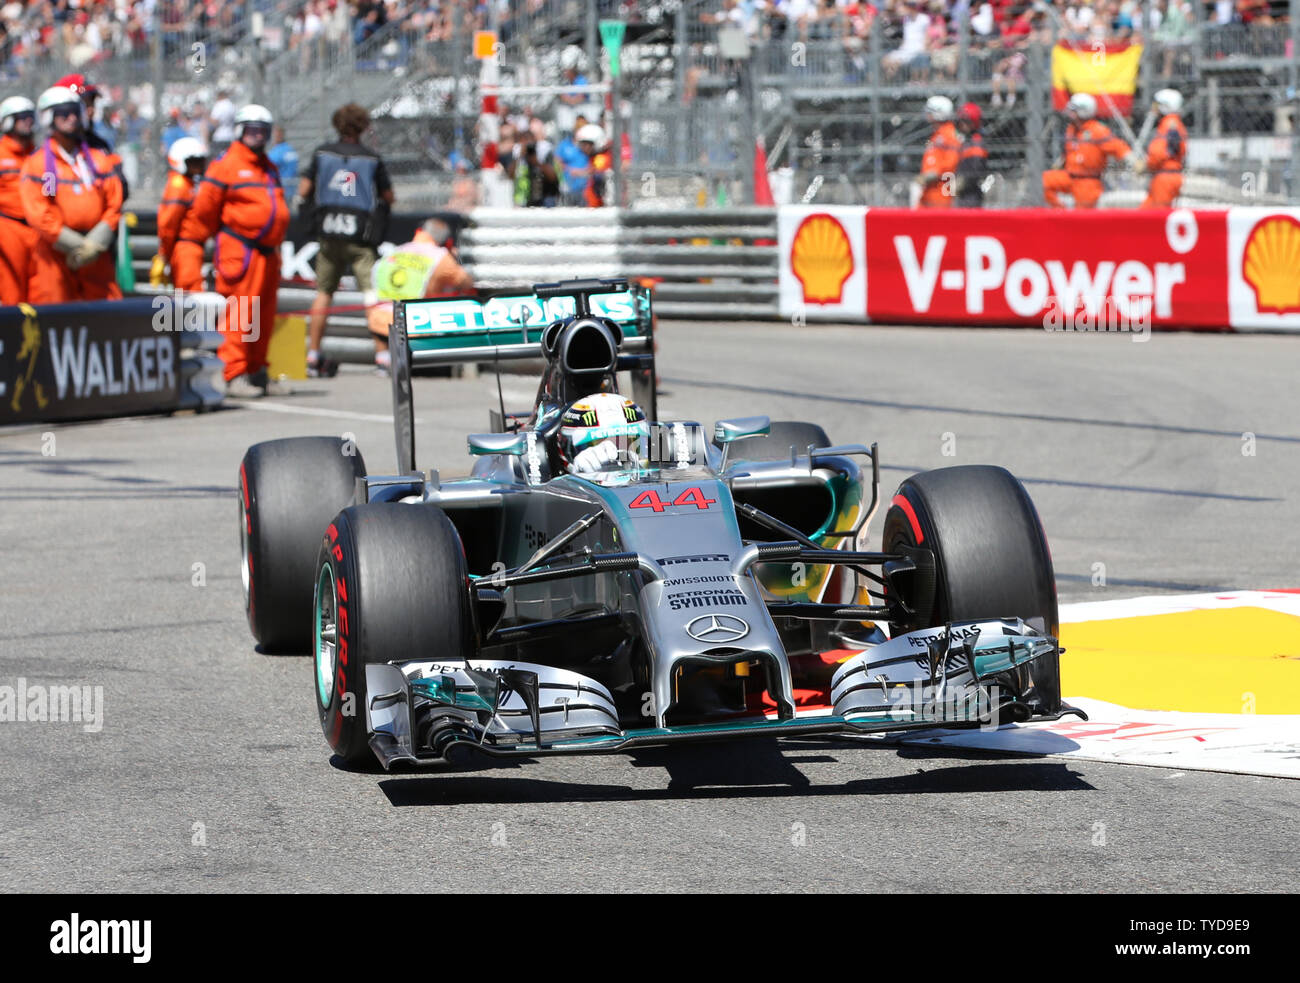 Mercedes F1 driver, British Lewis Hamilton, races during the qualifying  session of the Monaco Formula One Grand Prix in Monte Carlo on May 24, 2014.  Nico Rosberg took pole position for the